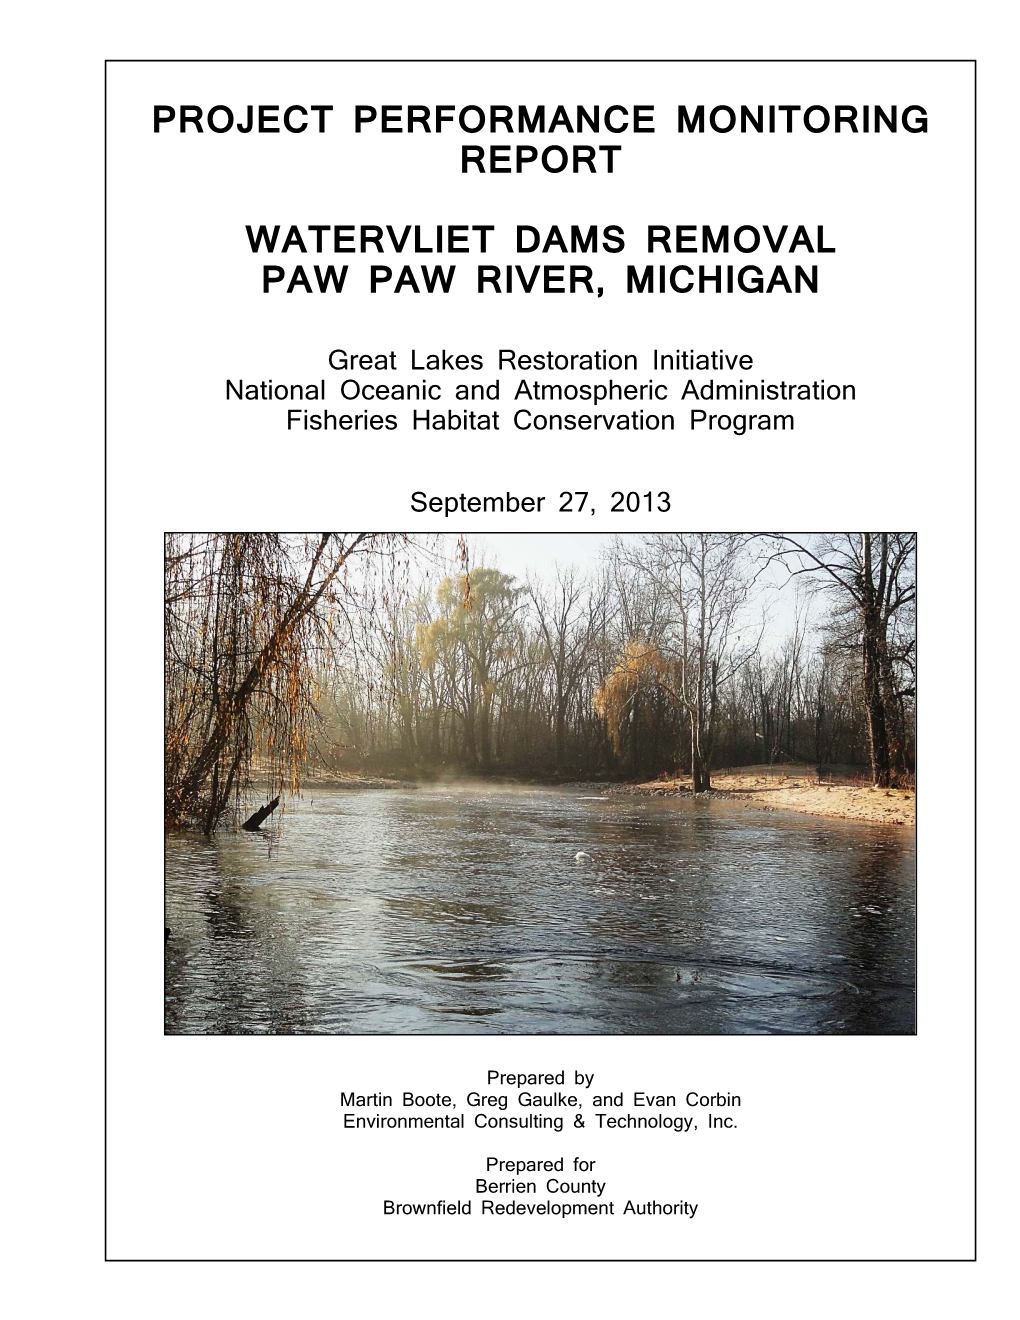 Project Performance Monitoring Report Watervliet Dams Removal Paw Paw